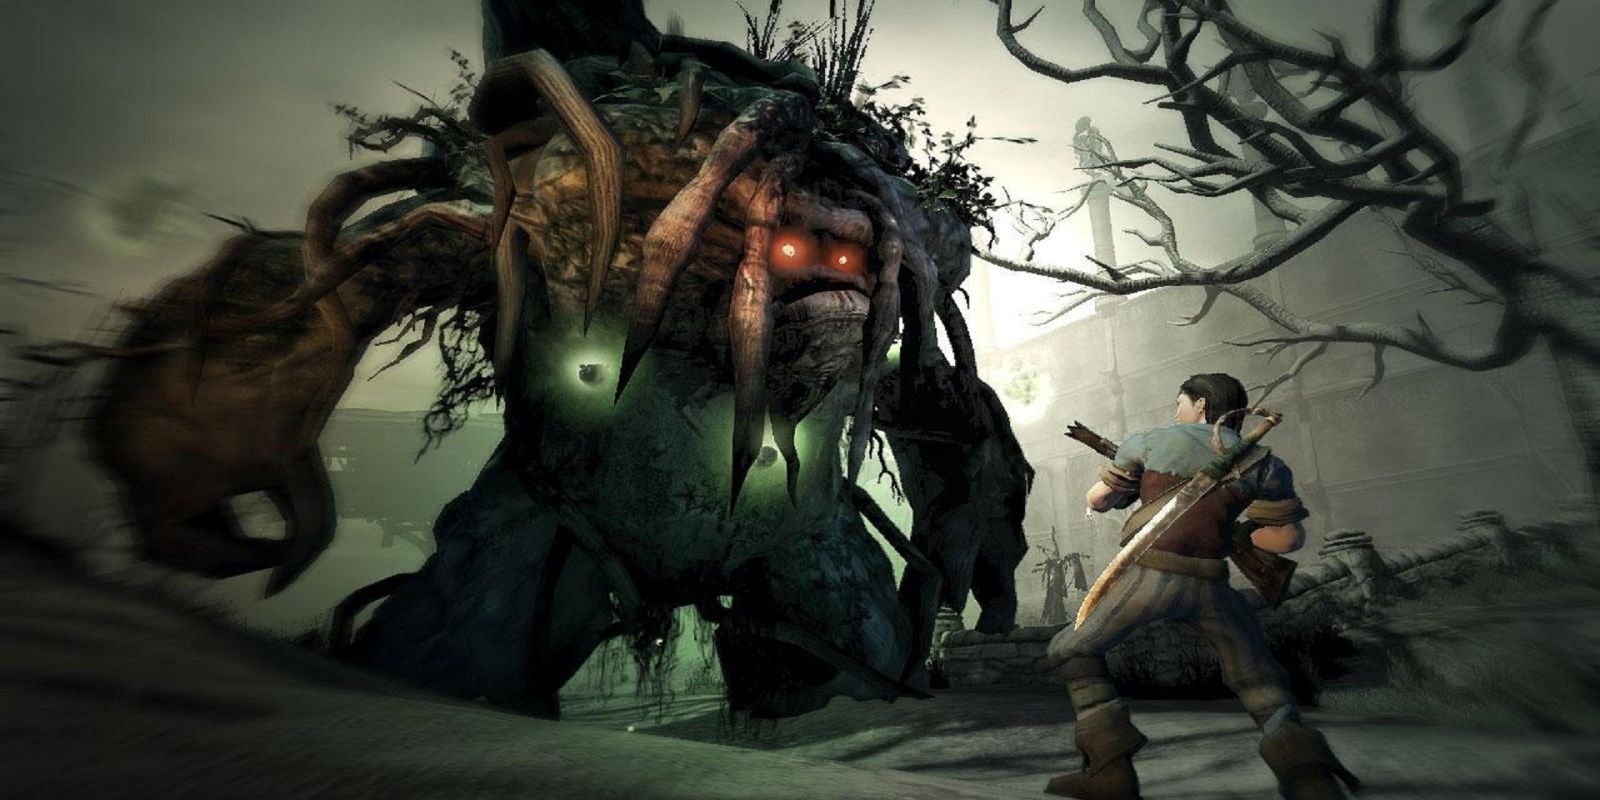 Fable 2 Player Faces a Monster